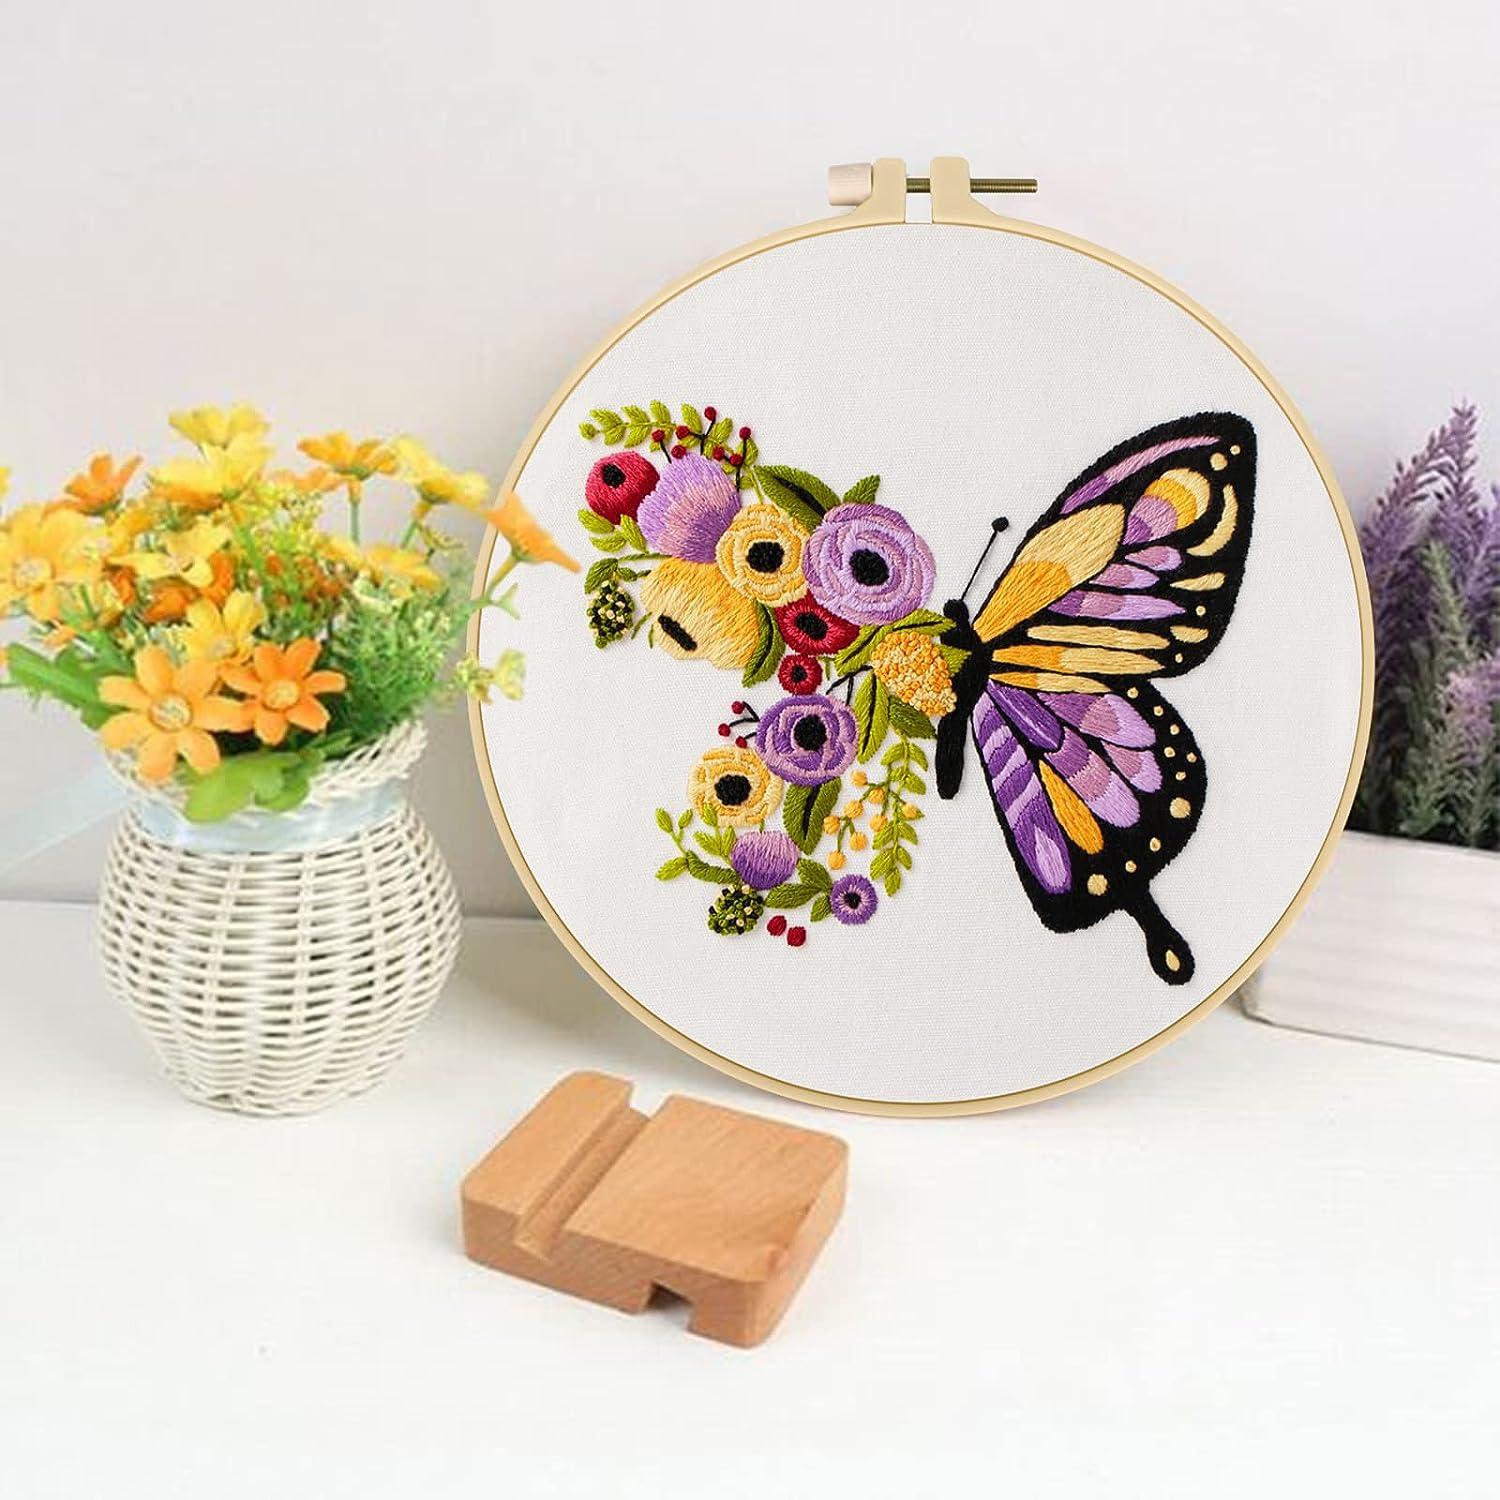 Birds Flowers Embroidery Kit for Adults Beginners Stamped Cross Stitch Kits  with Birds Pattern Stamped Embroidery Cloth Hoops Threads Needles Easy